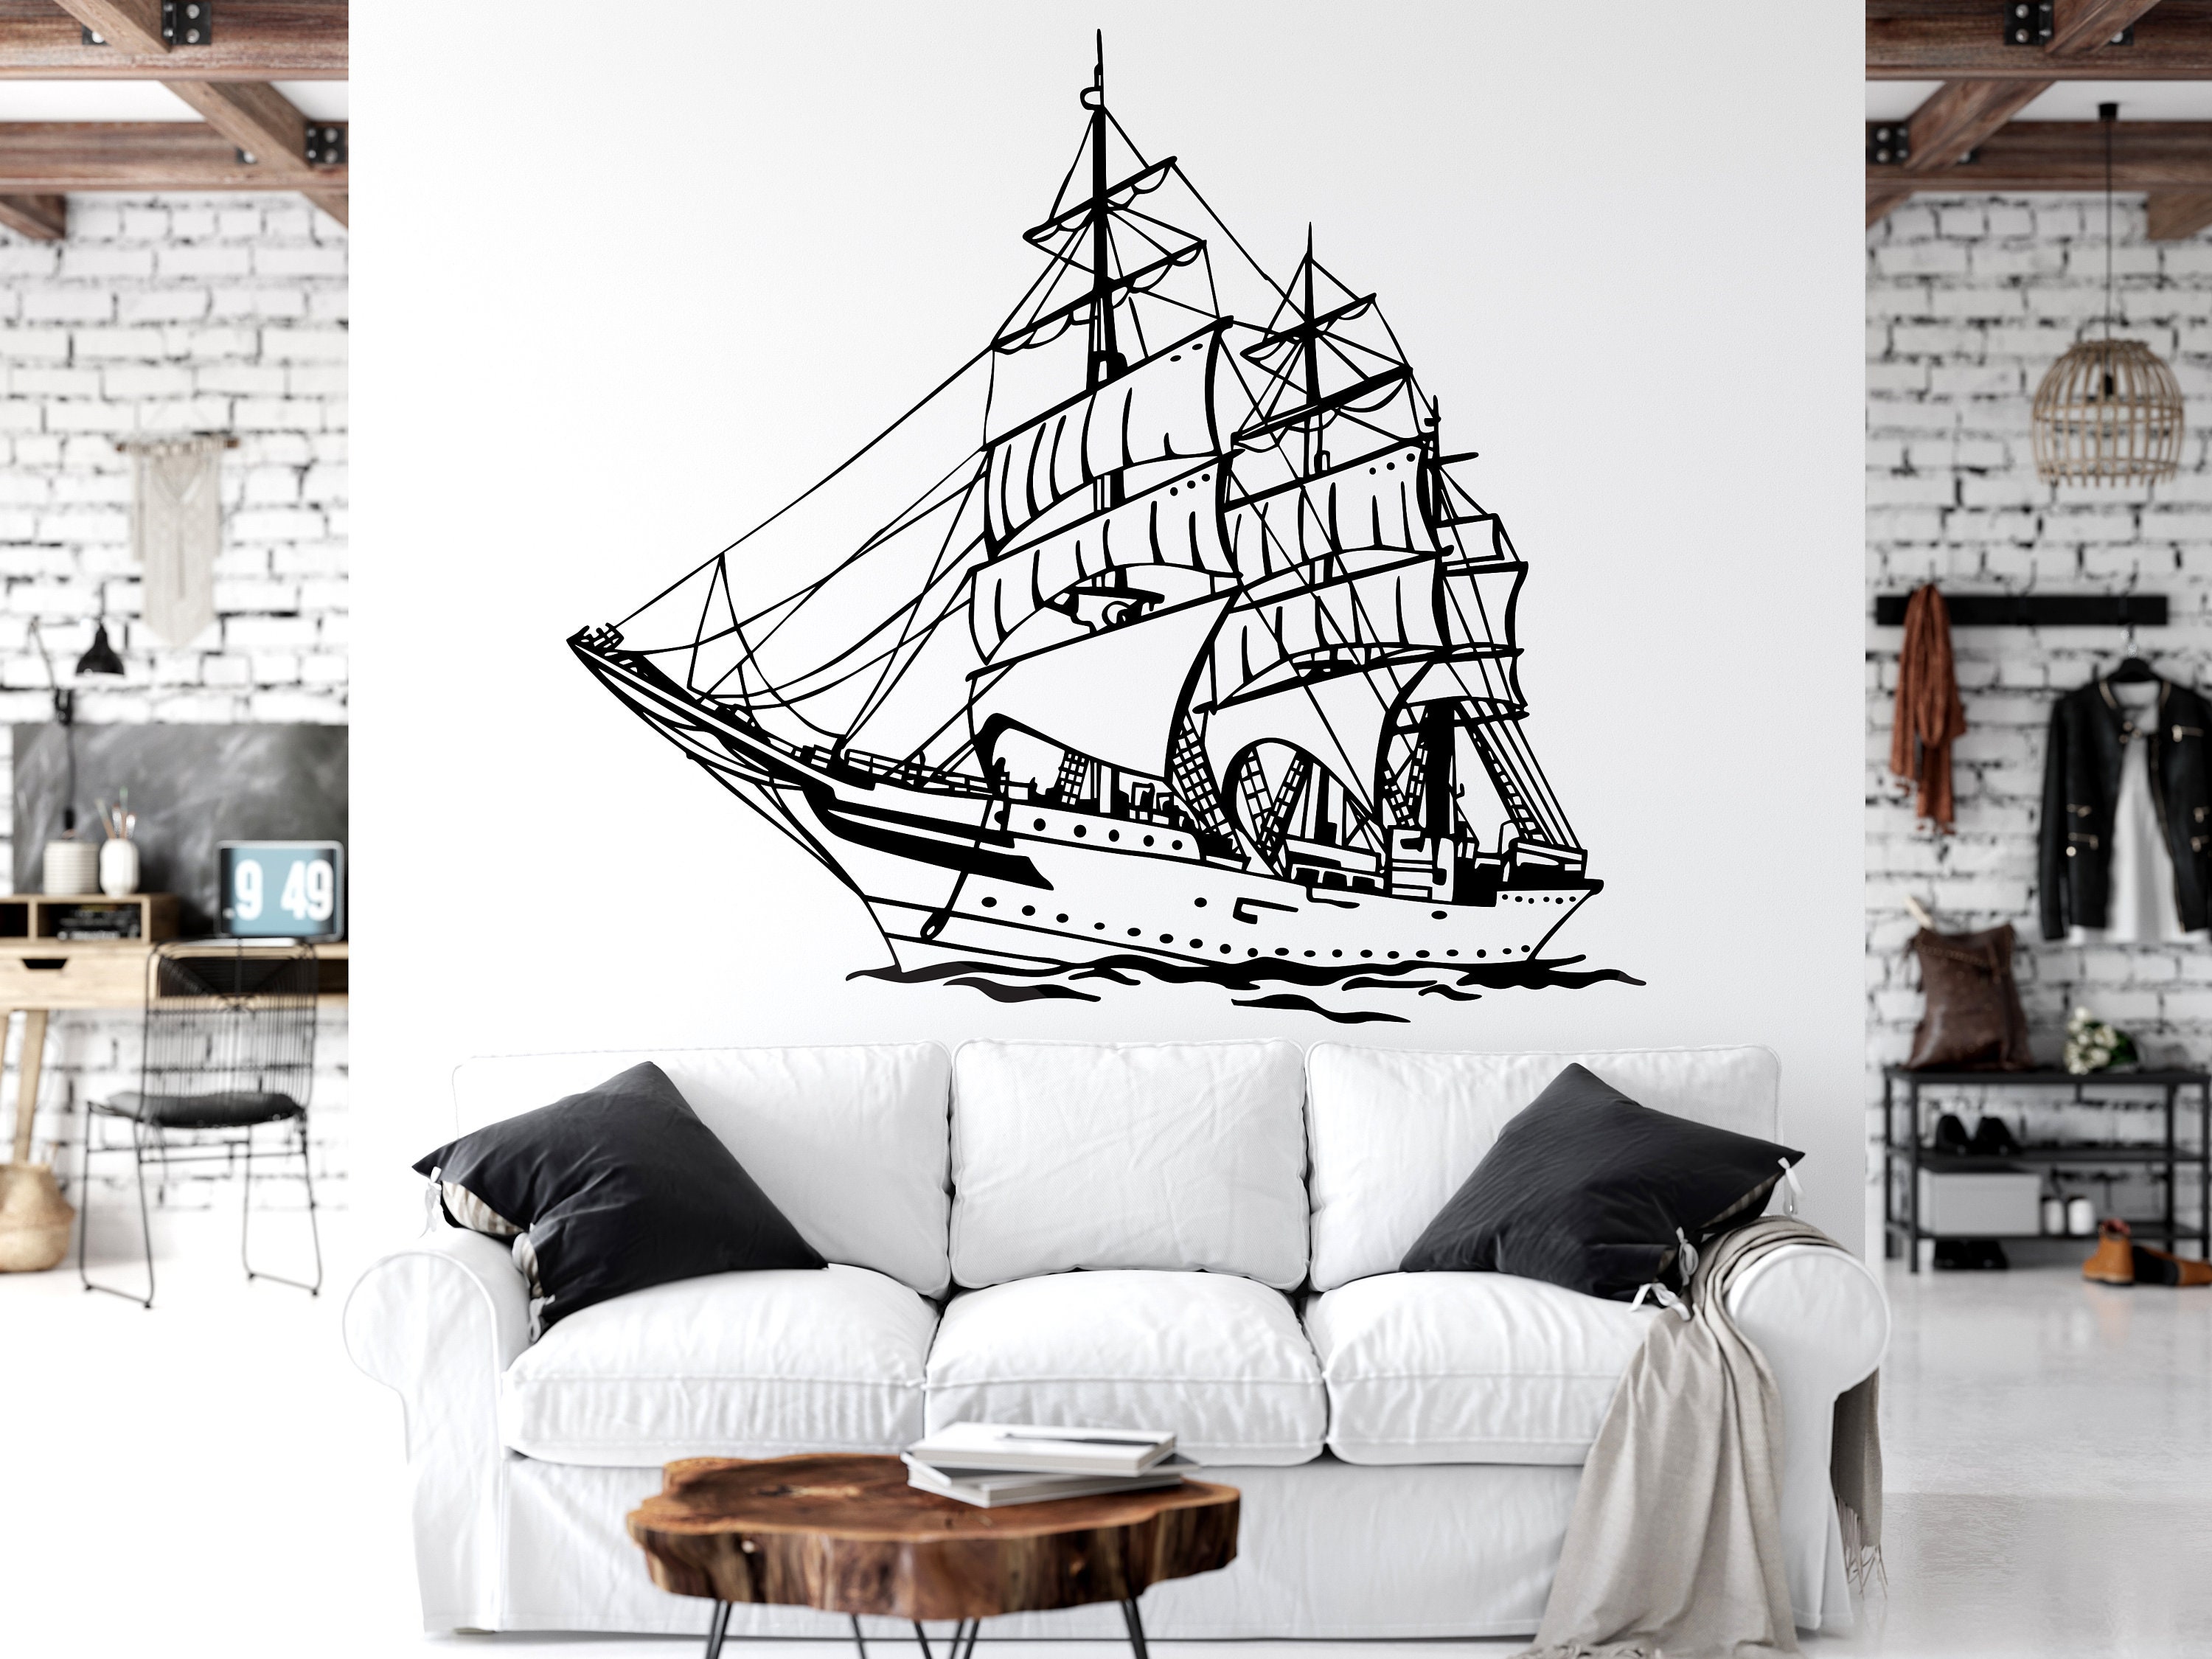  In High Tide Or In Low Tide Ill Be By Your Side - Love Marriage  Couple Romantic Bedroom Home Ocean Navy Sailor Boat Anchor - Wall Decal  Quote Vinyl Lettering Art